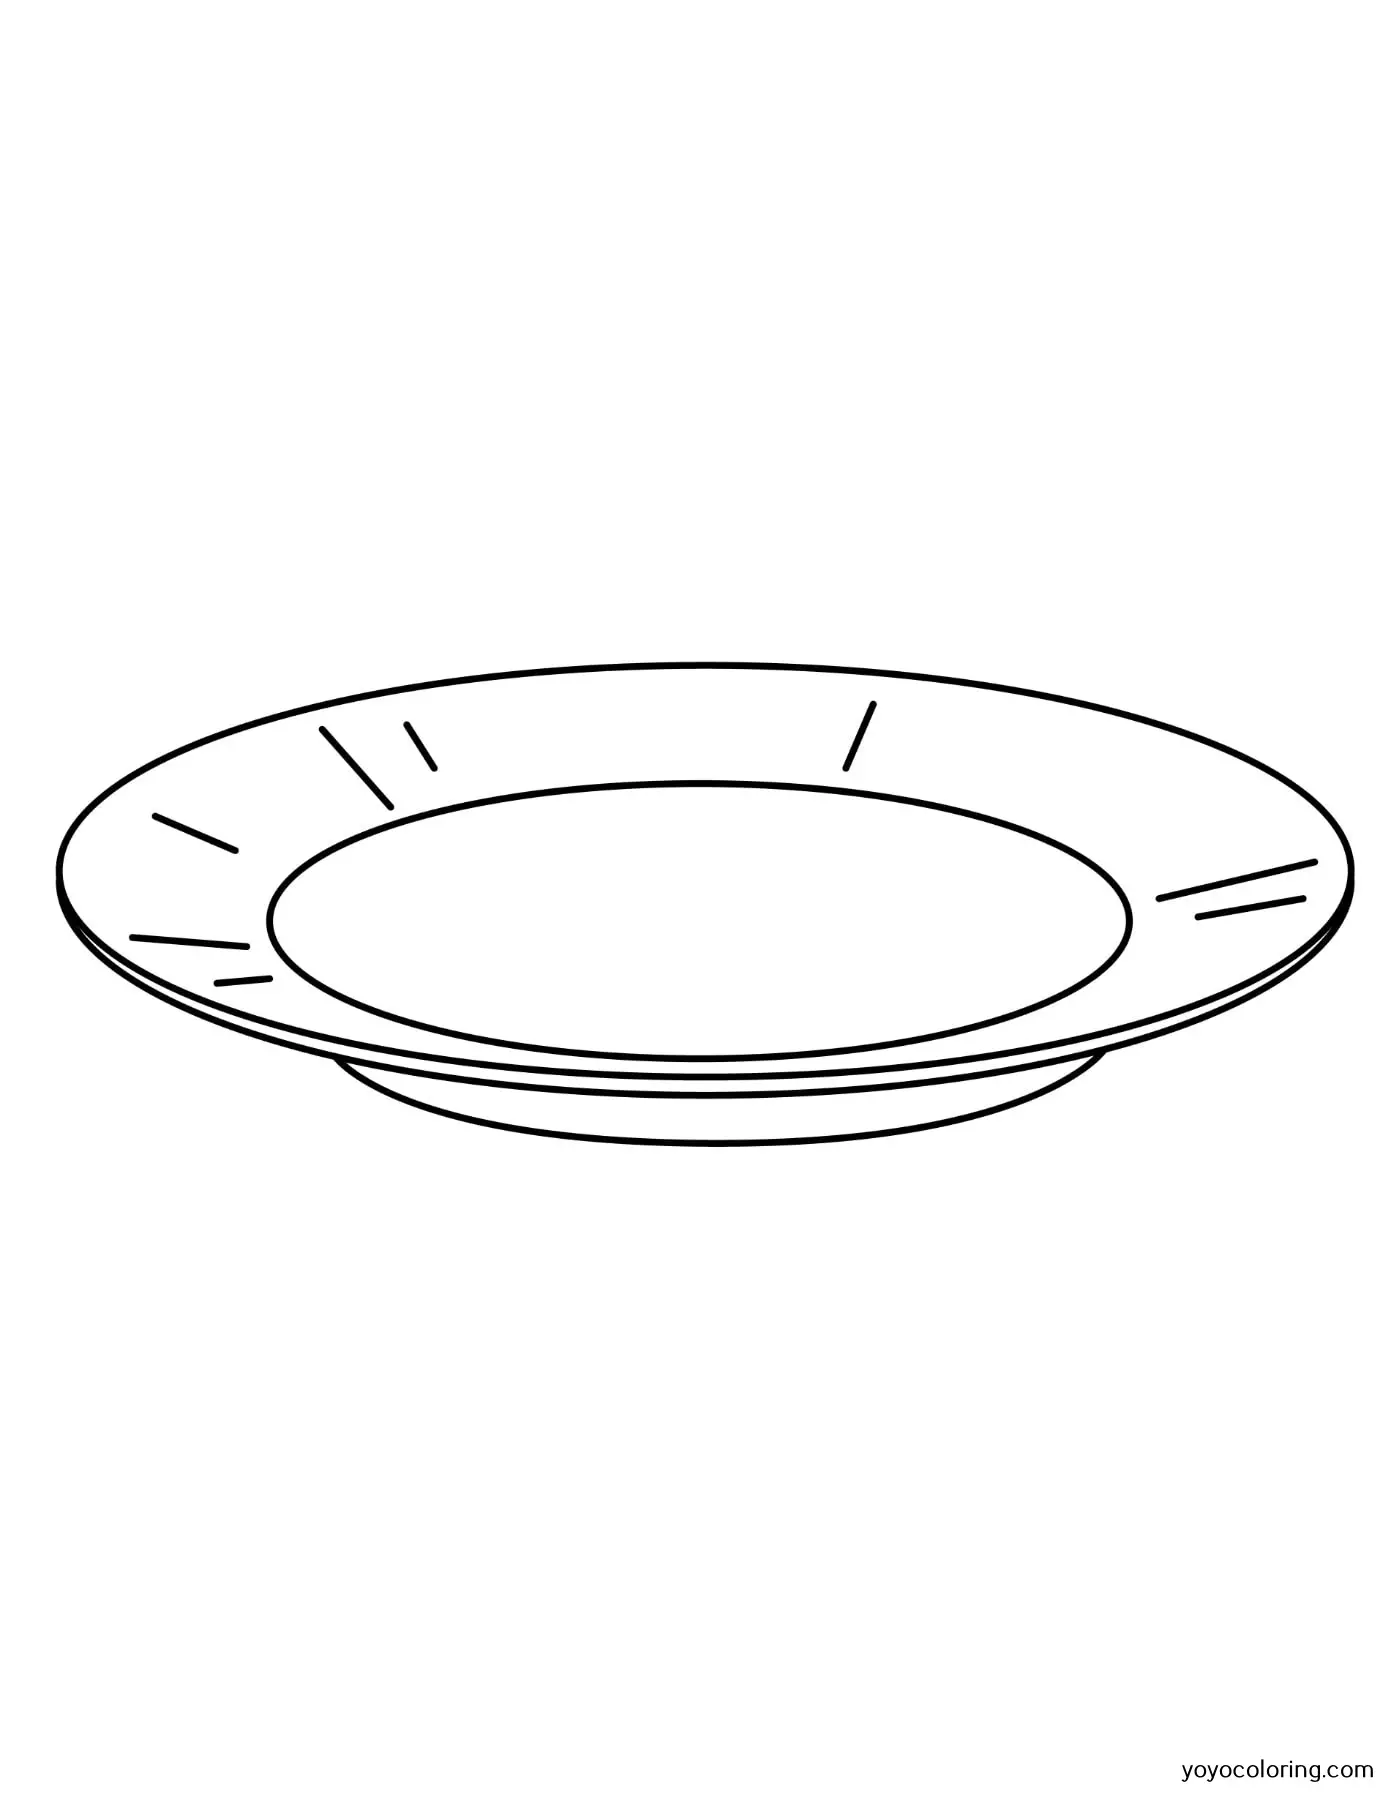 Plate coloring pages á printable painting template